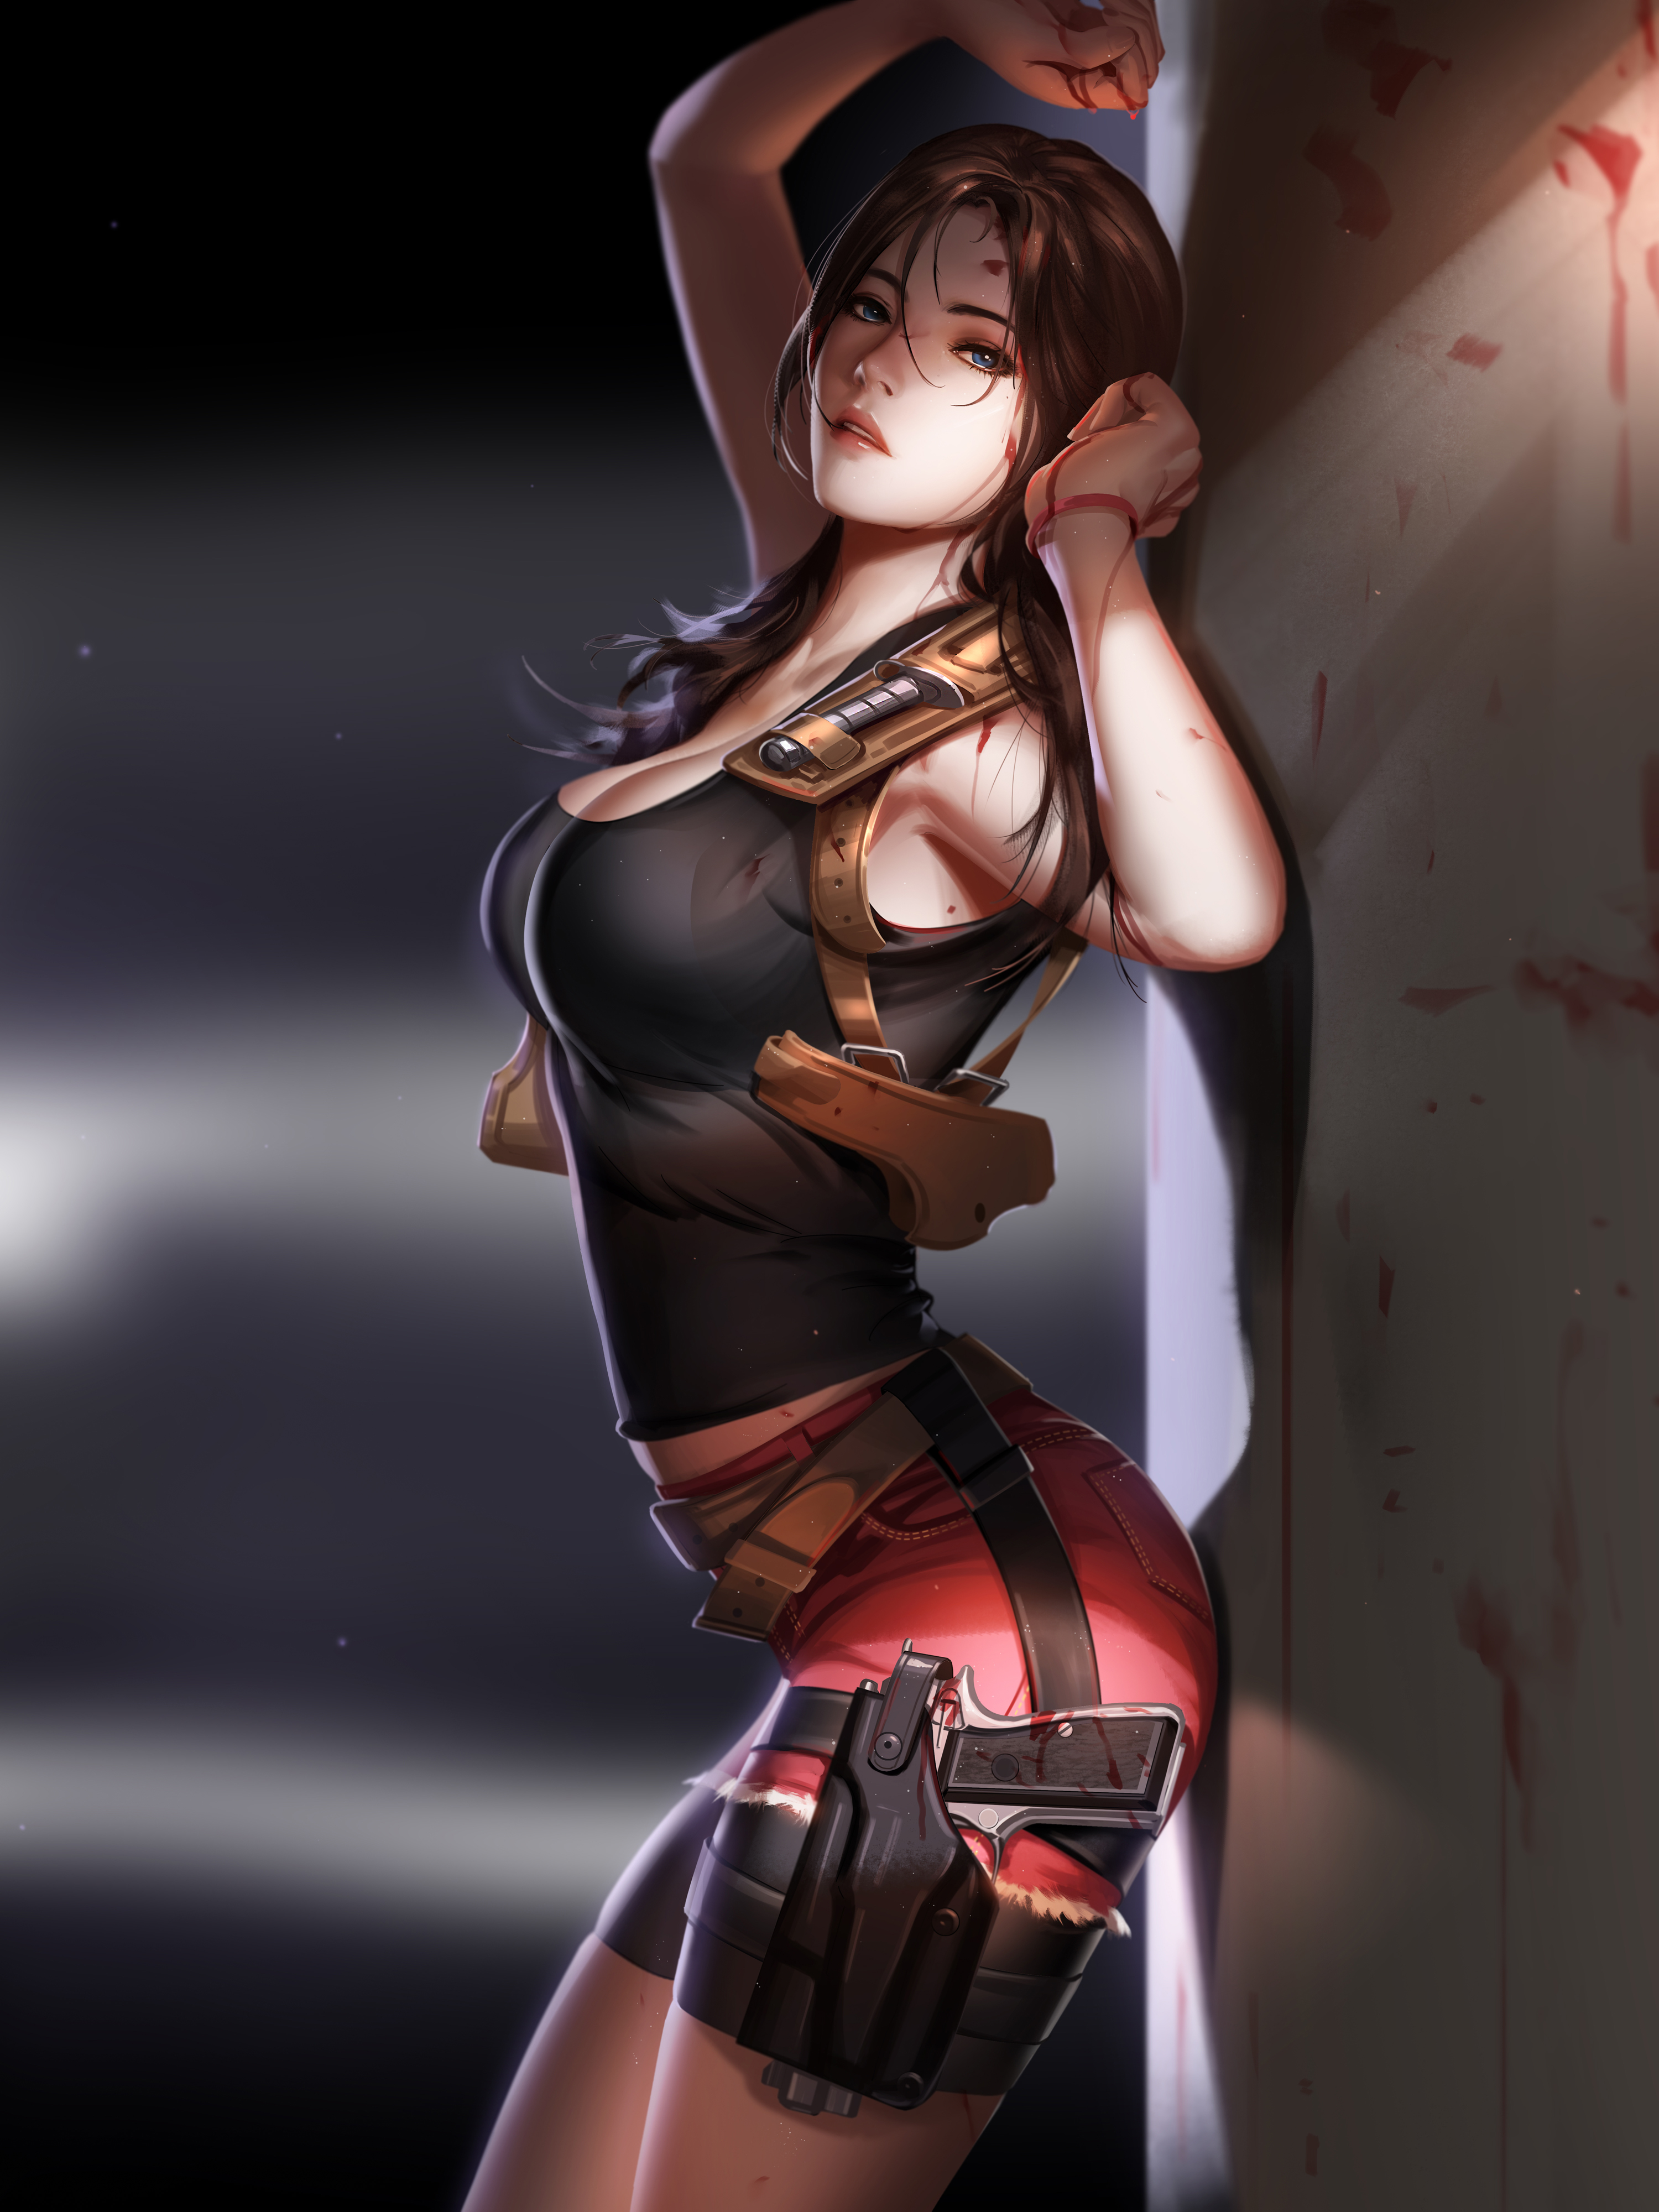 Anime 3000x4000 video games video game girls video game characters women brunette long hair looking at viewer blue eyes side view cleavage tank top black top jean shorts arched back pistol depth of field sensual gaze portrait display fan art artwork drawing digital art illustration Jason Liang big boobs